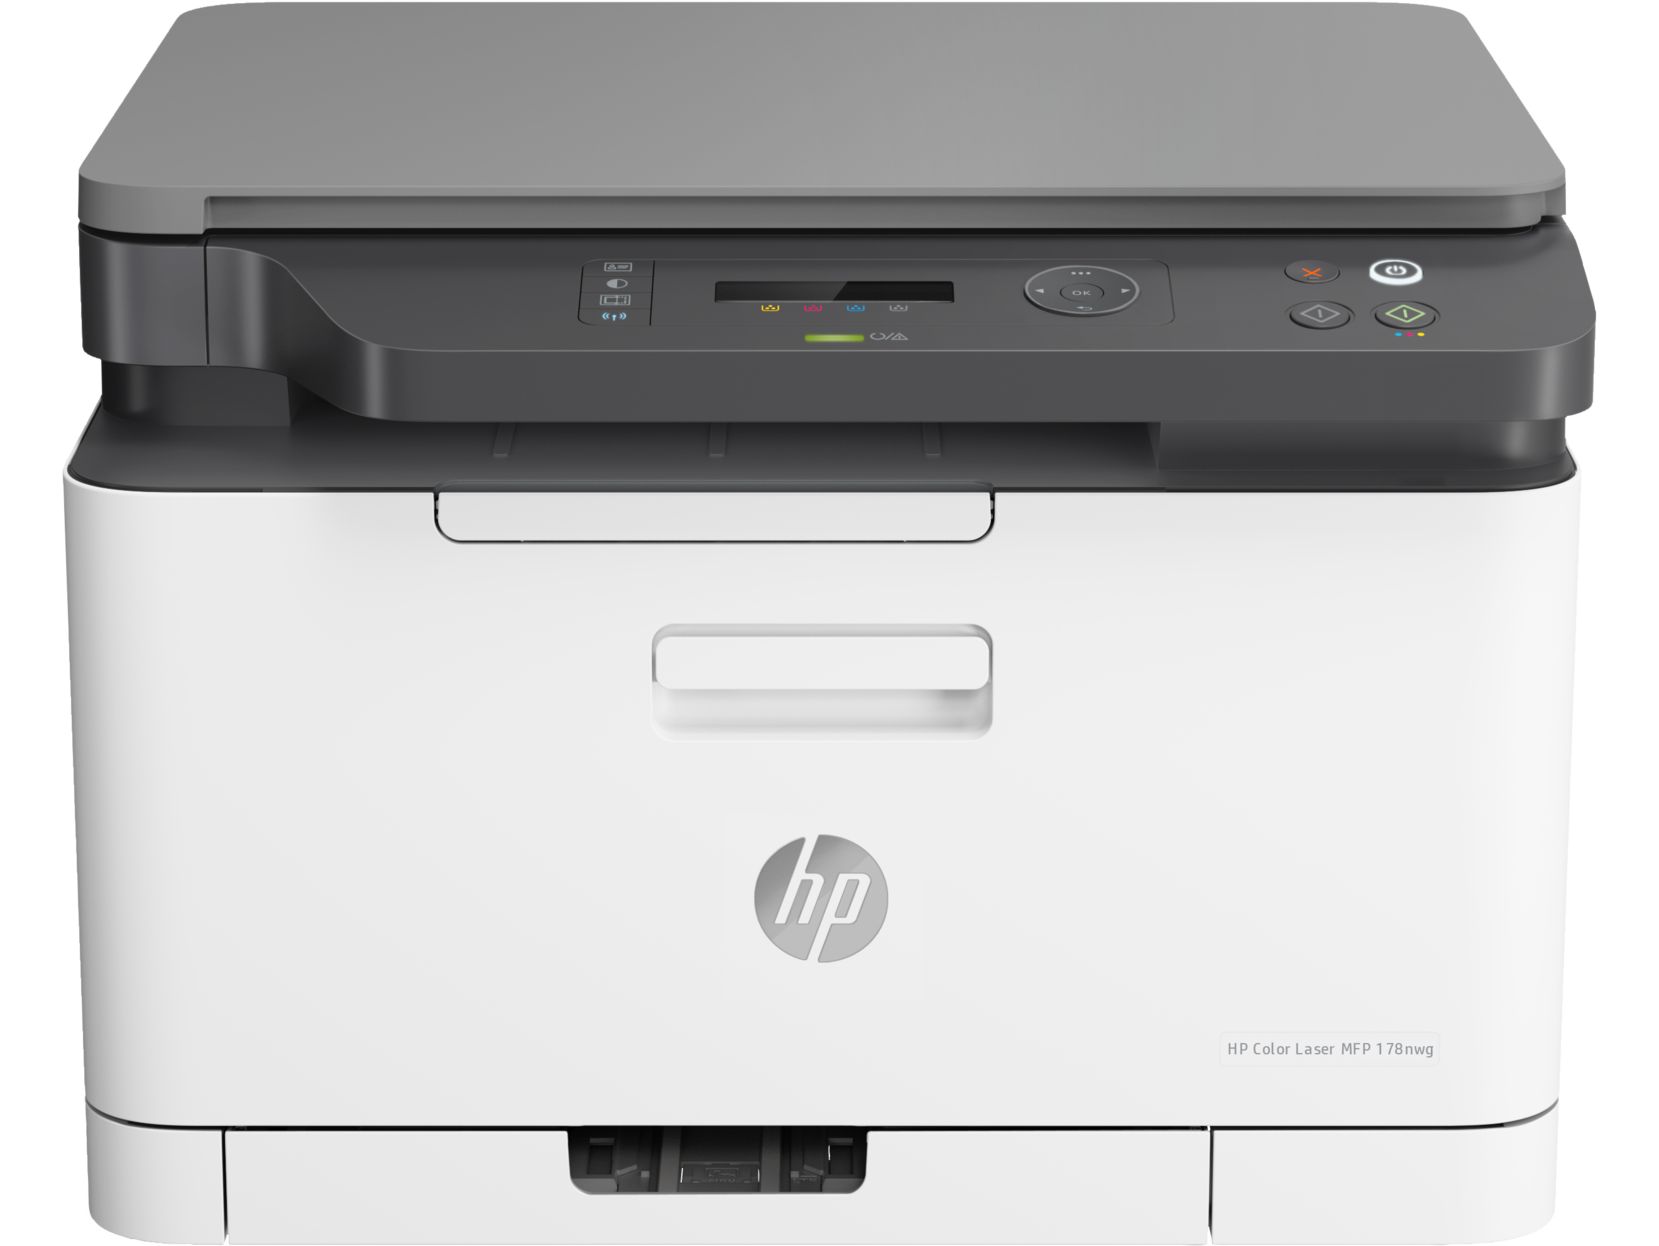 МФУ HP Color Laser MFP 178nw 4ZB96A - фото 1